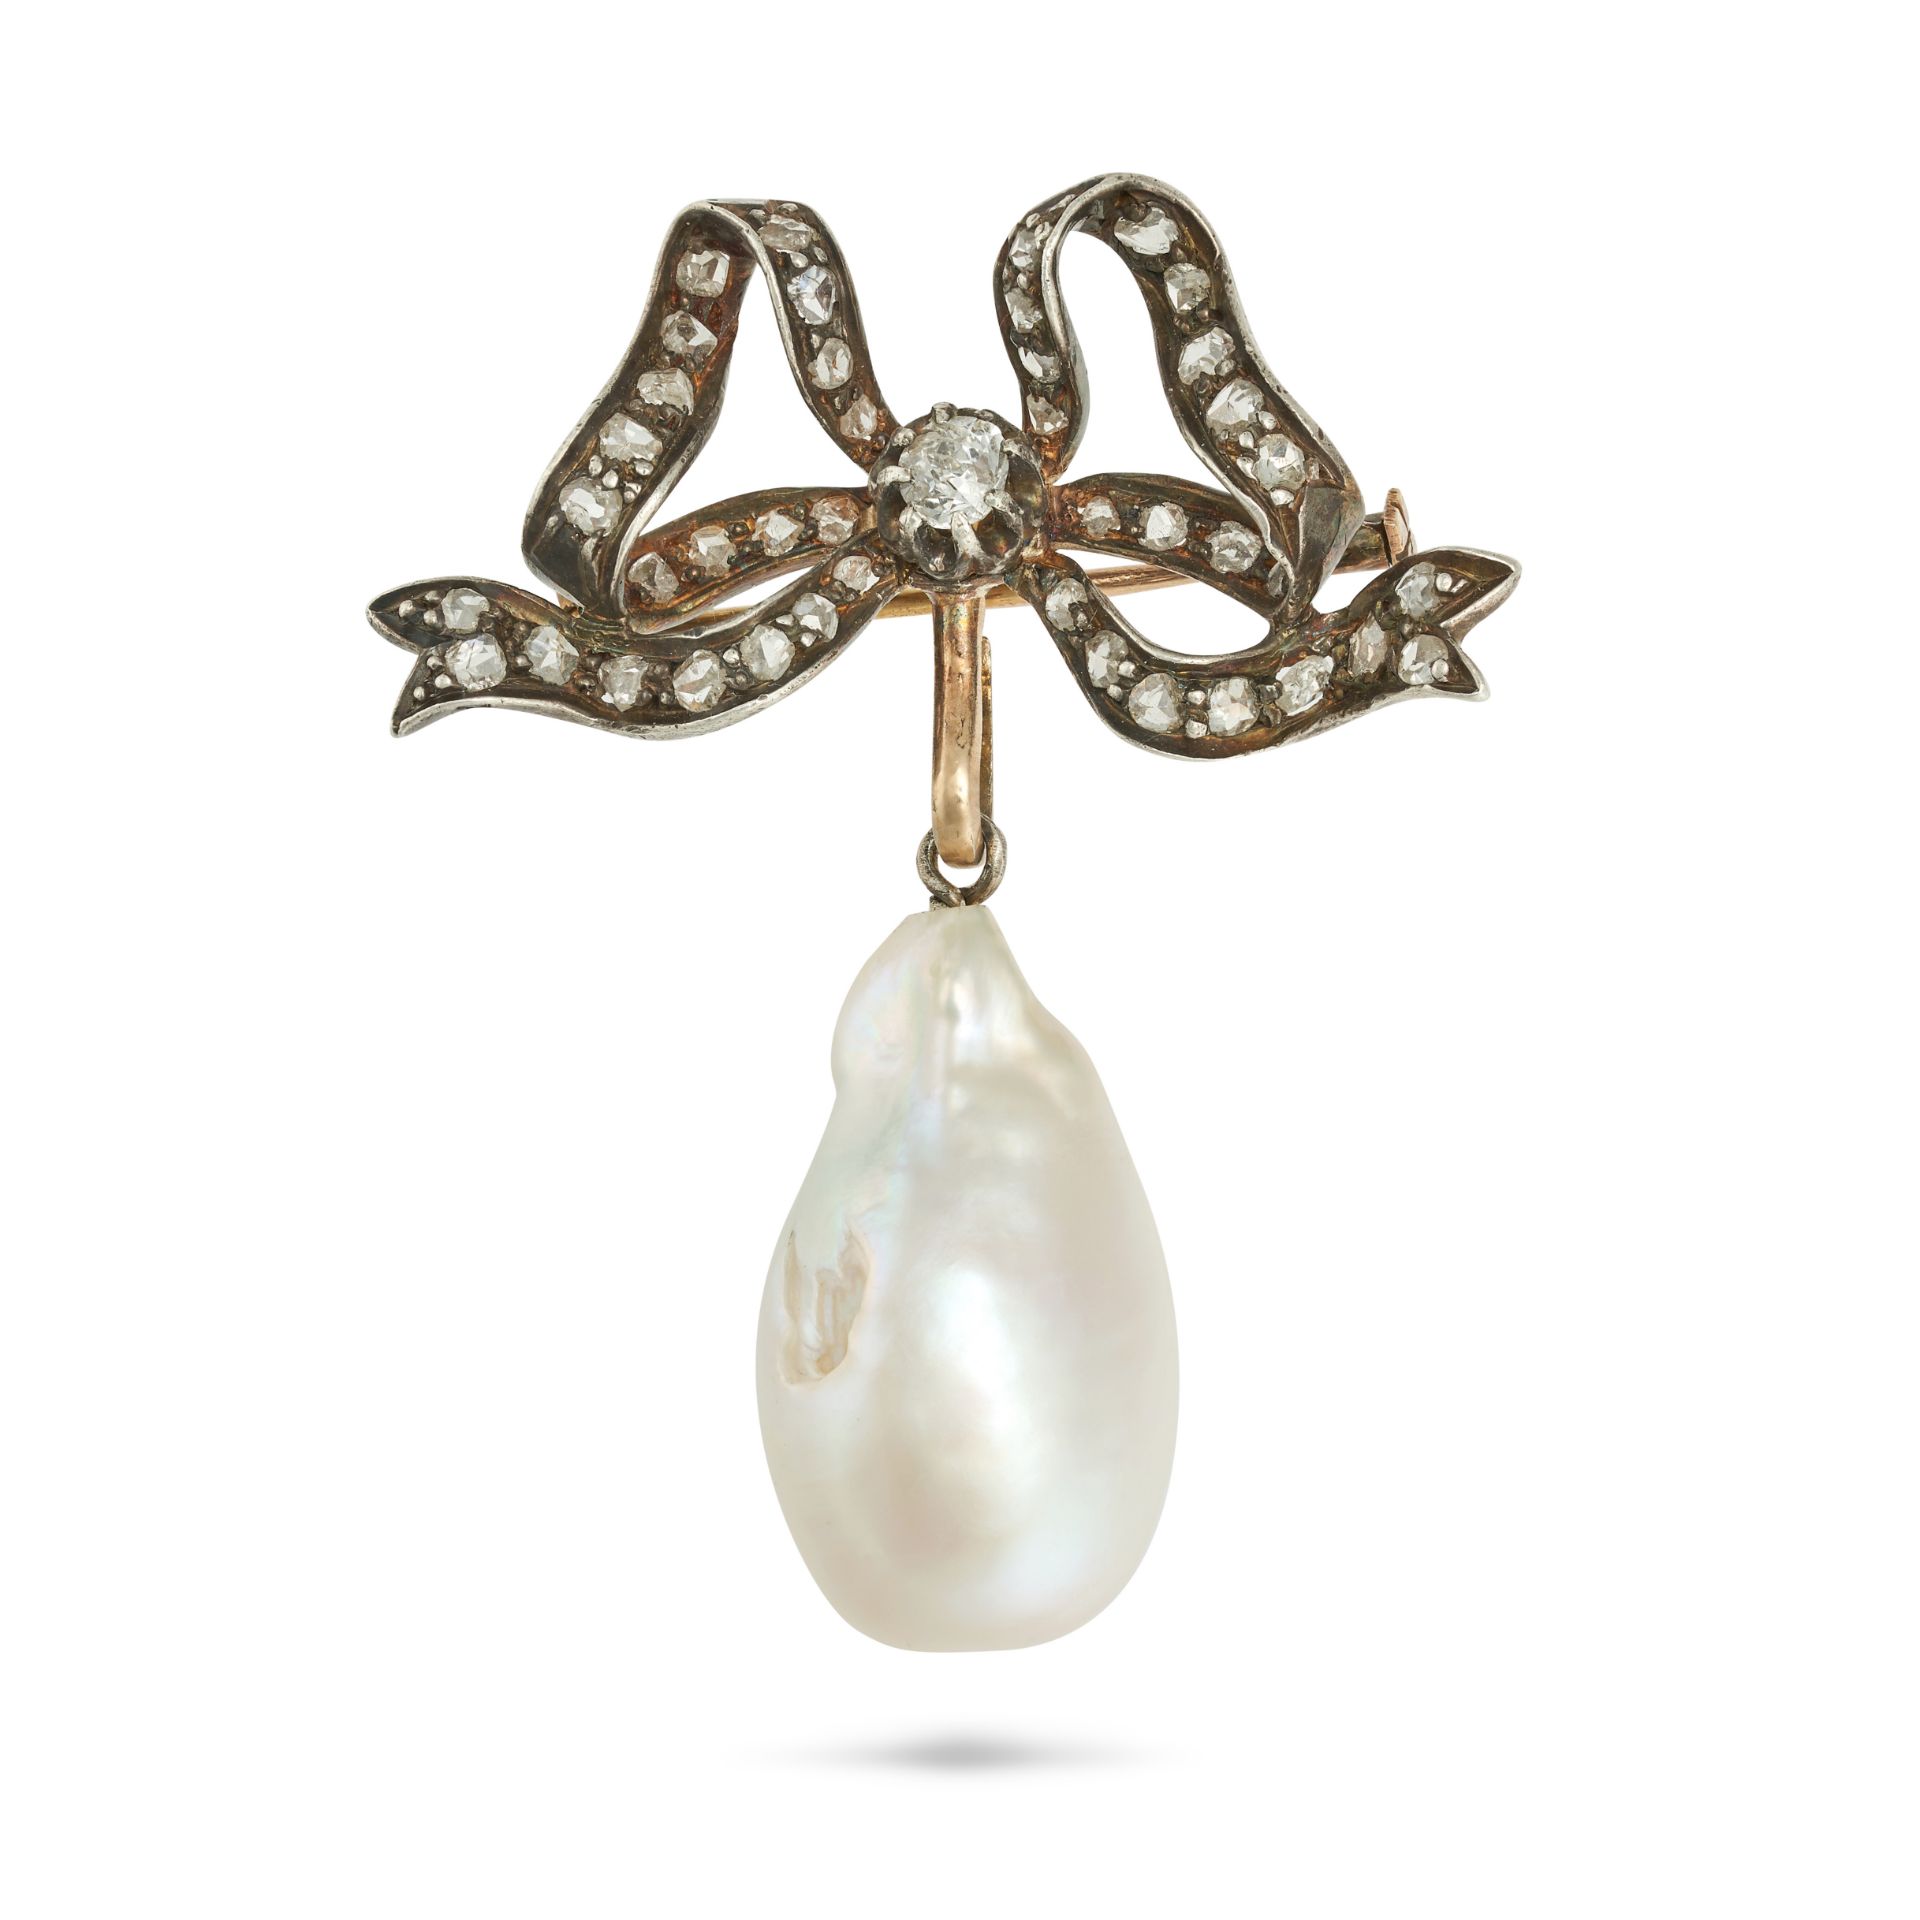 A DIAMOND AND PEARL BOW BROOCH in yellow gold and silver, designed as a bow set with old and rose...